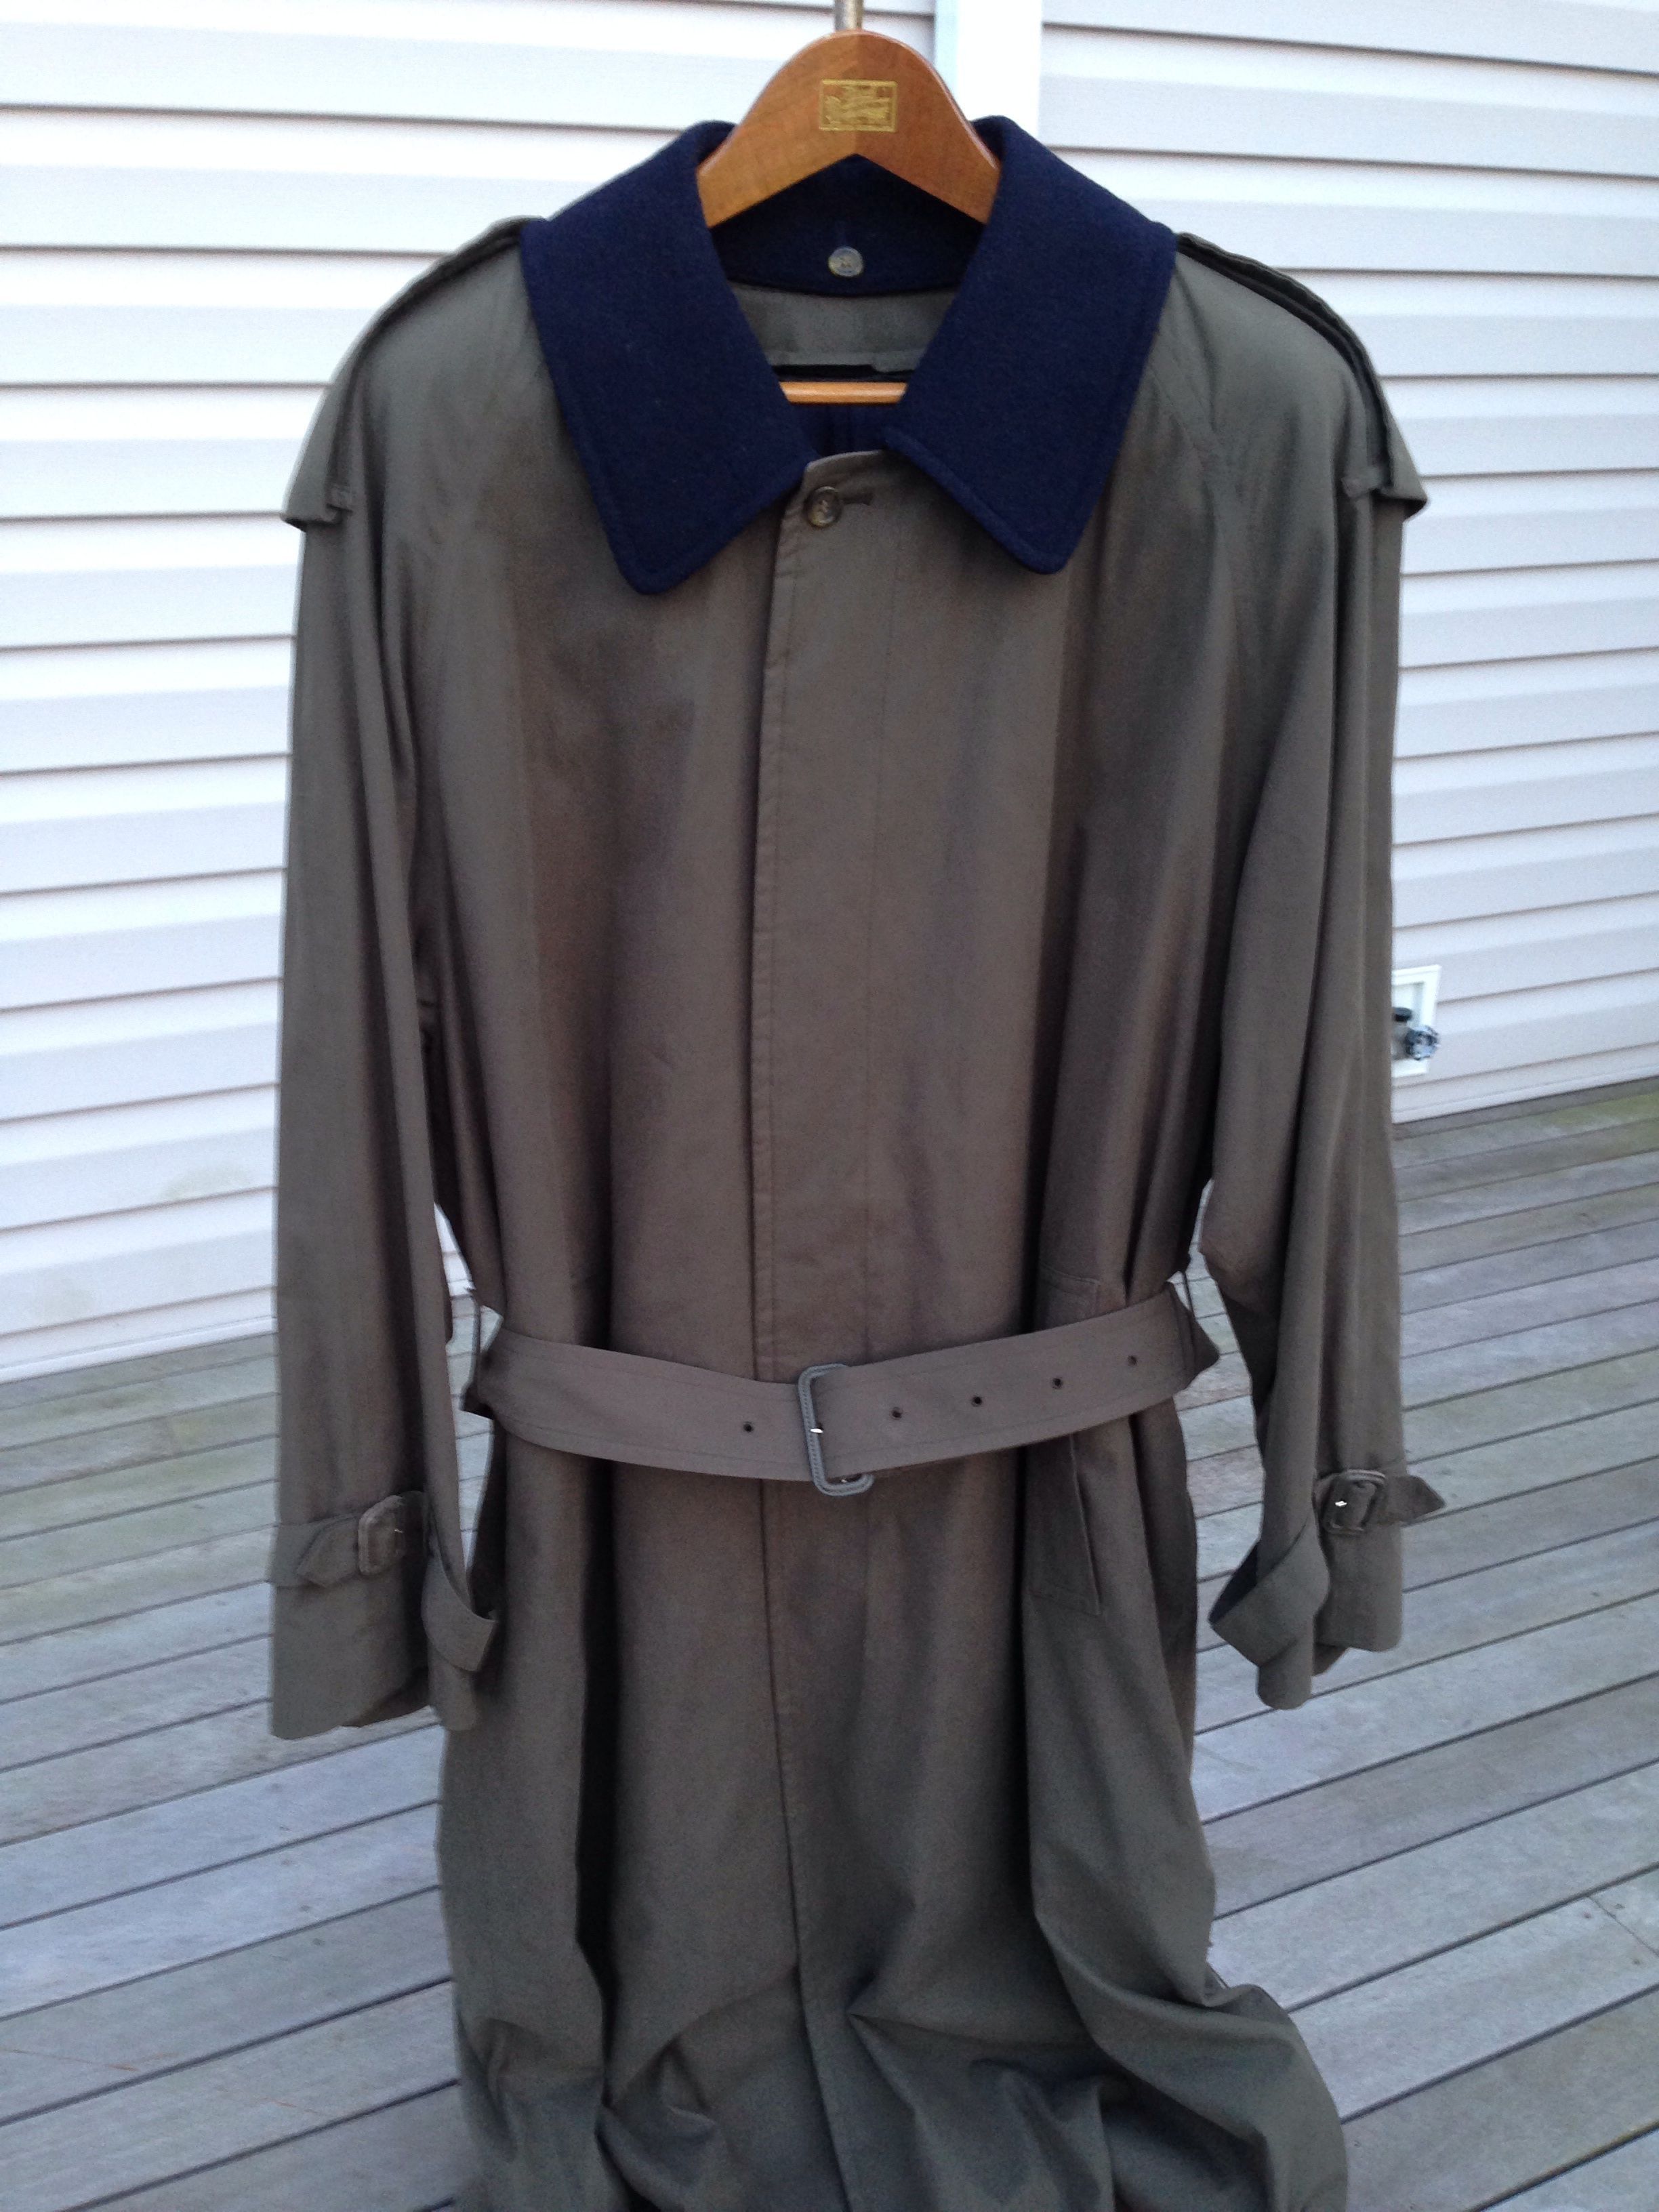 New Old Stock NWOT Burberry's Trench Coat Raincoat w/ Removable Wool Liner  | Styleforum